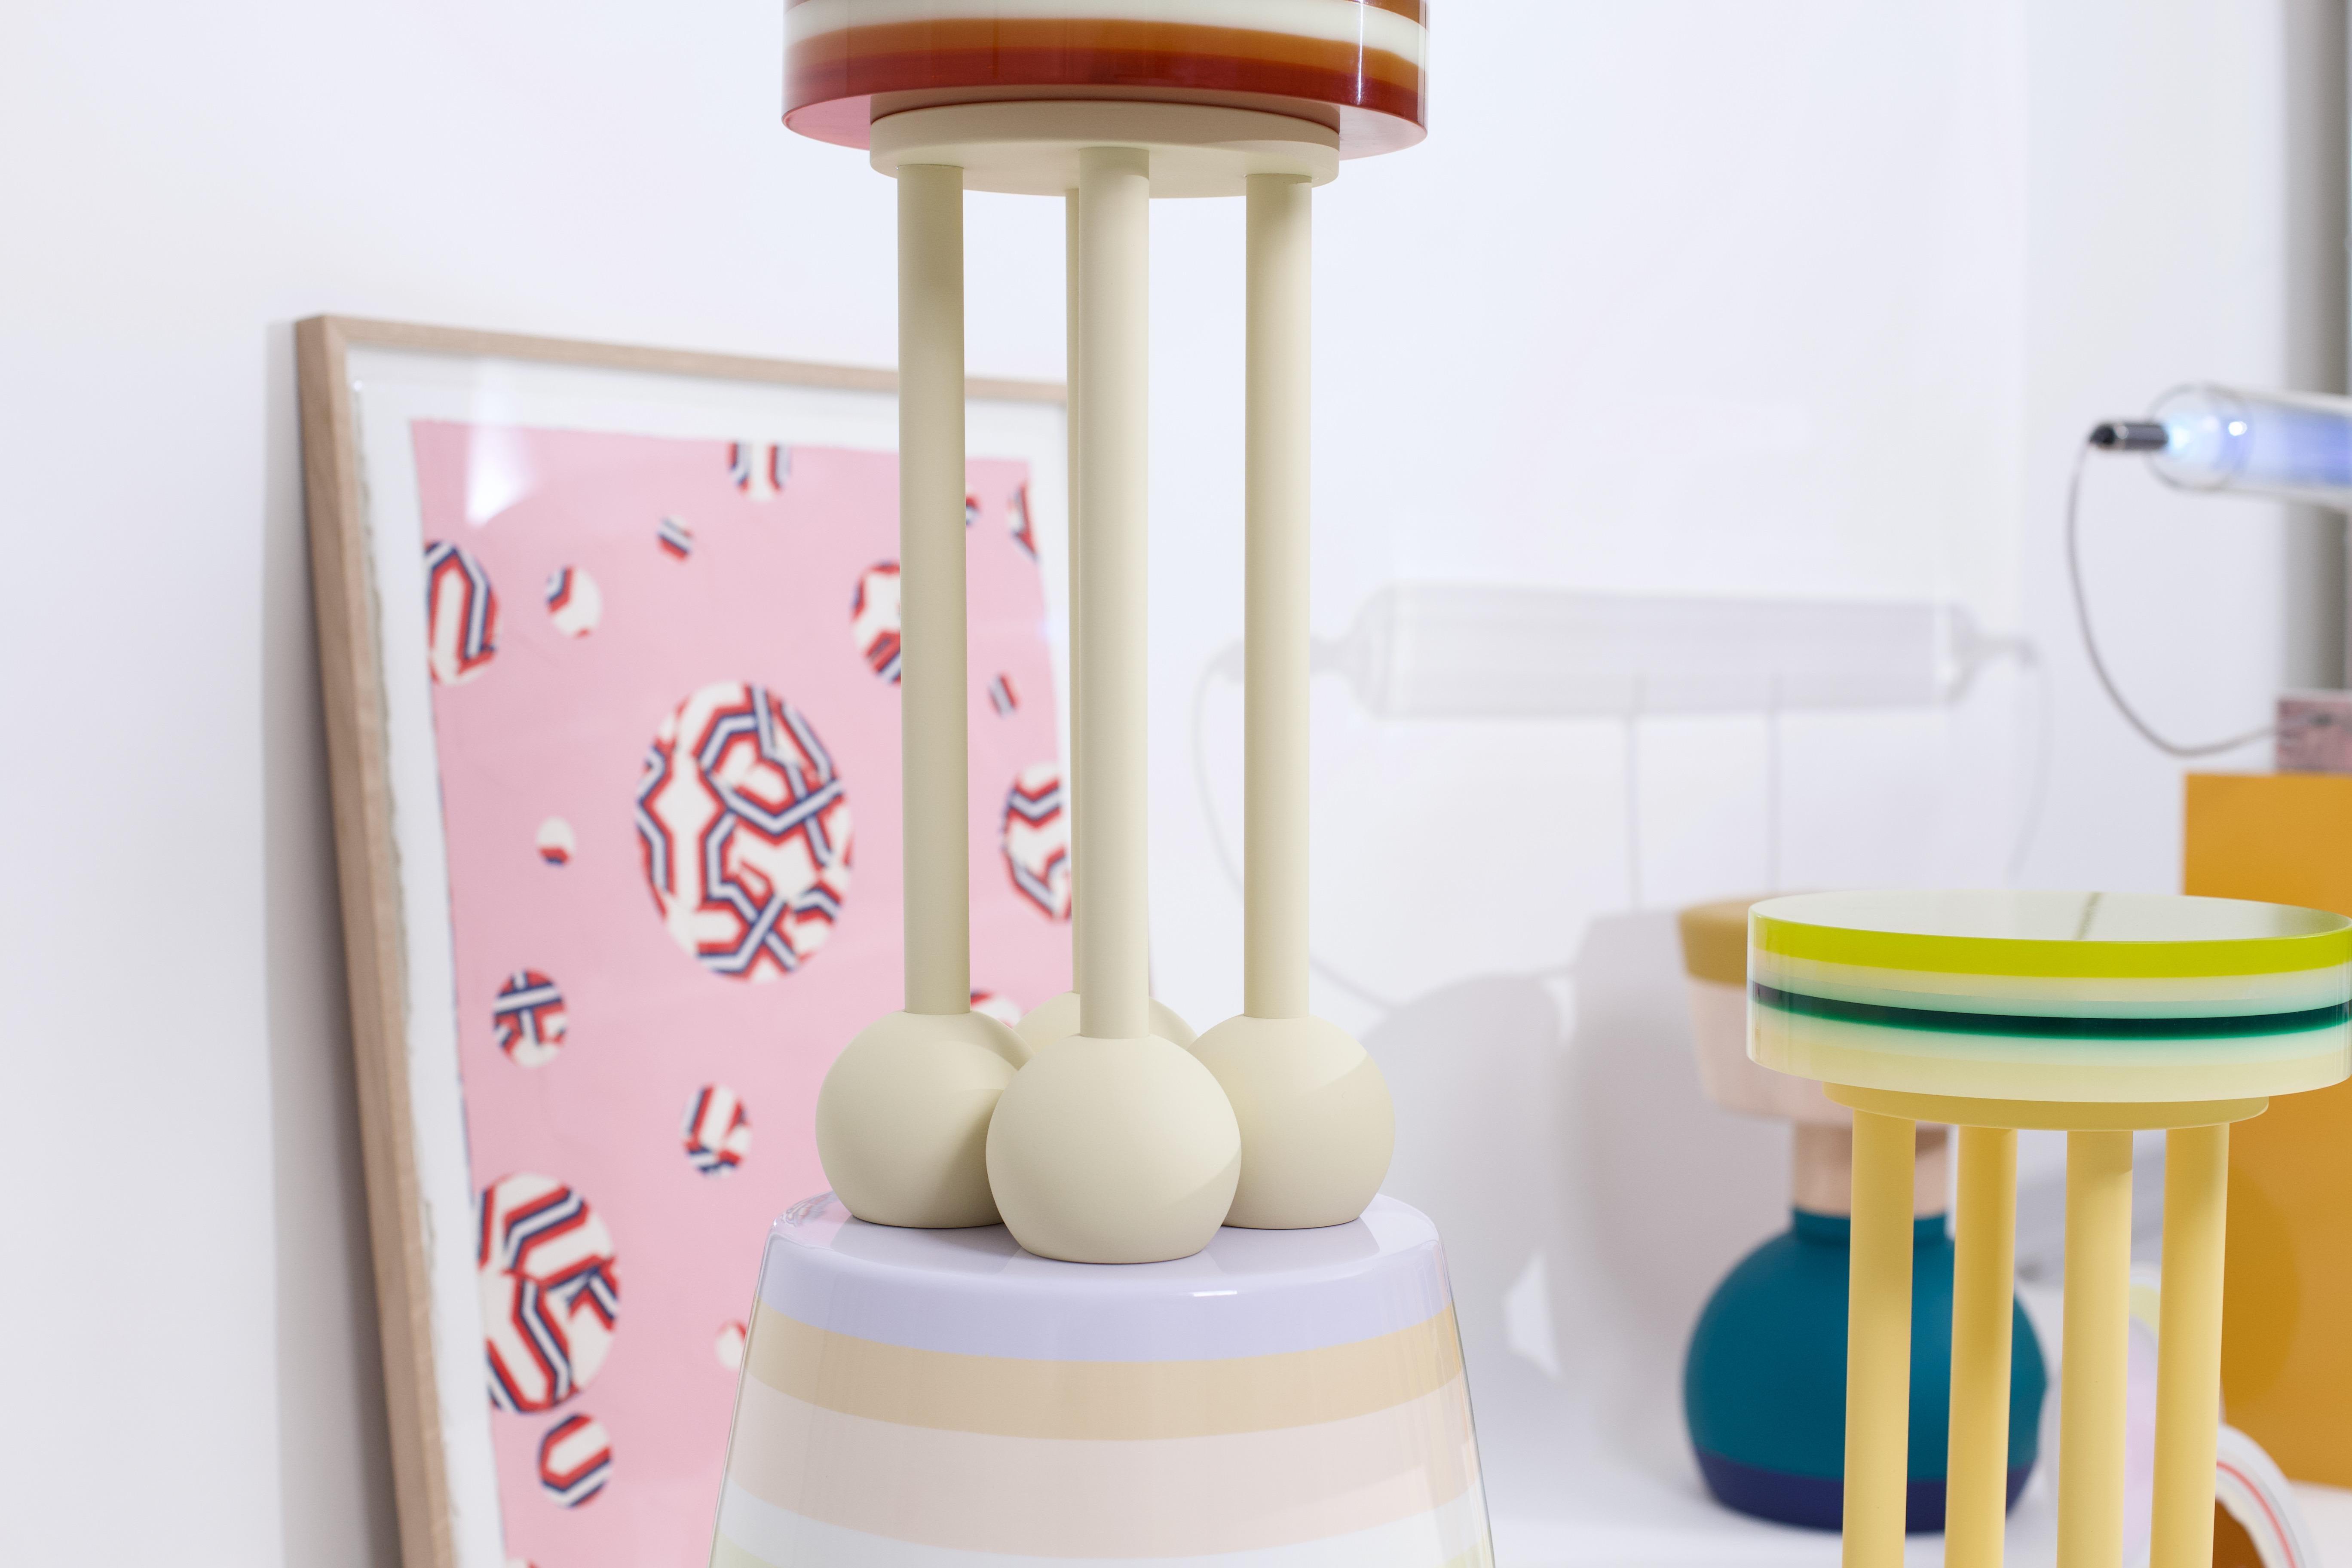 WHO AM I, Unique Tall Side Table by STUDIO YOLK 5